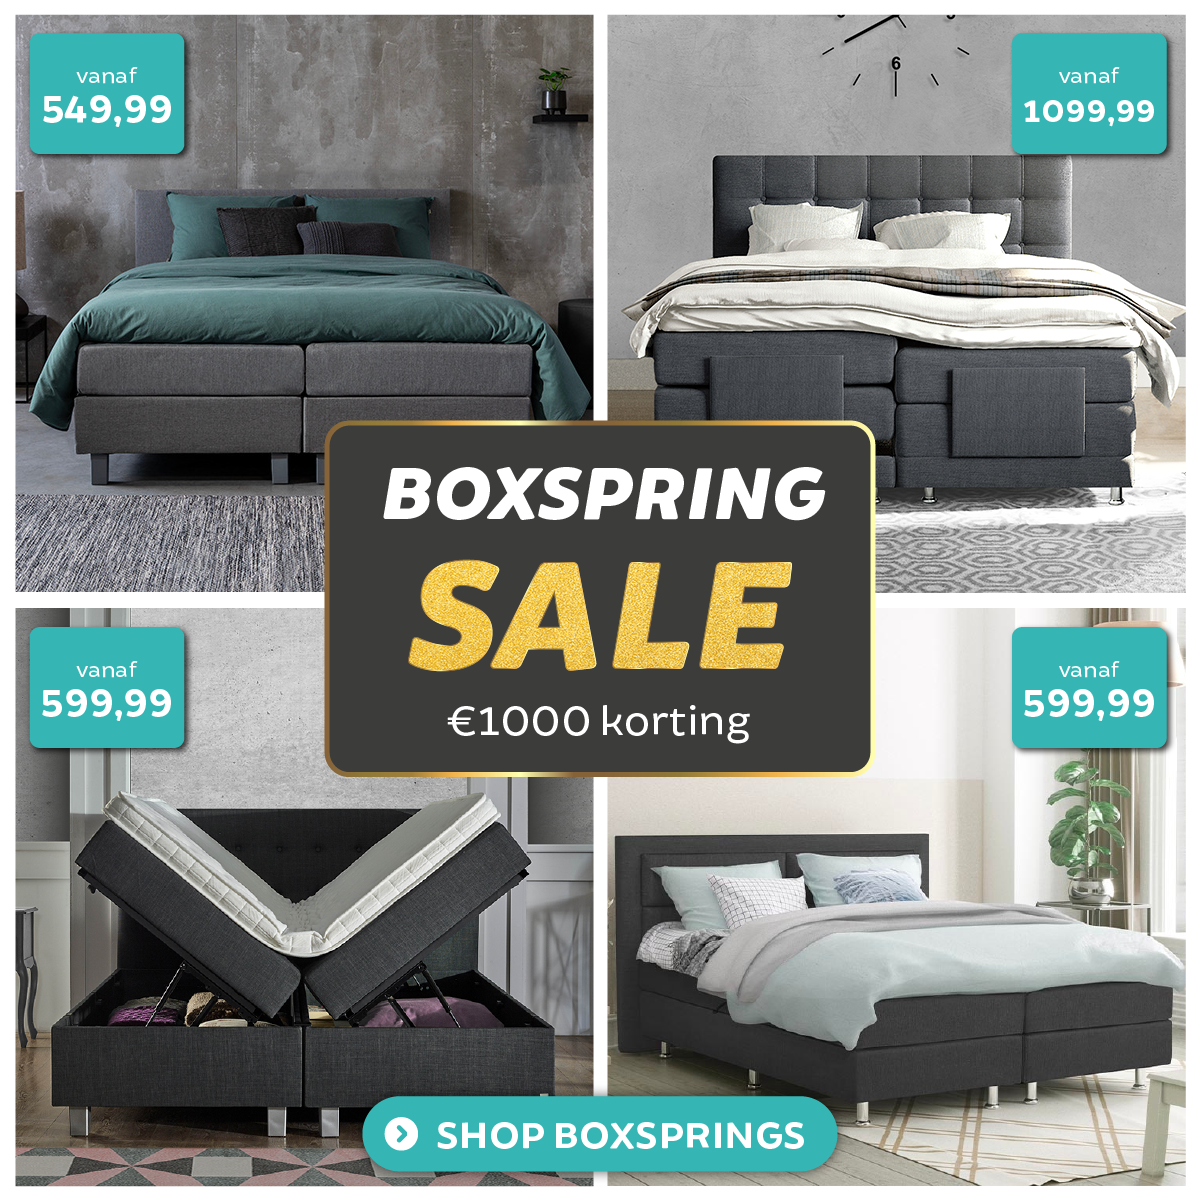 BOXSPRING SALE: wel €1000 korting | Milled